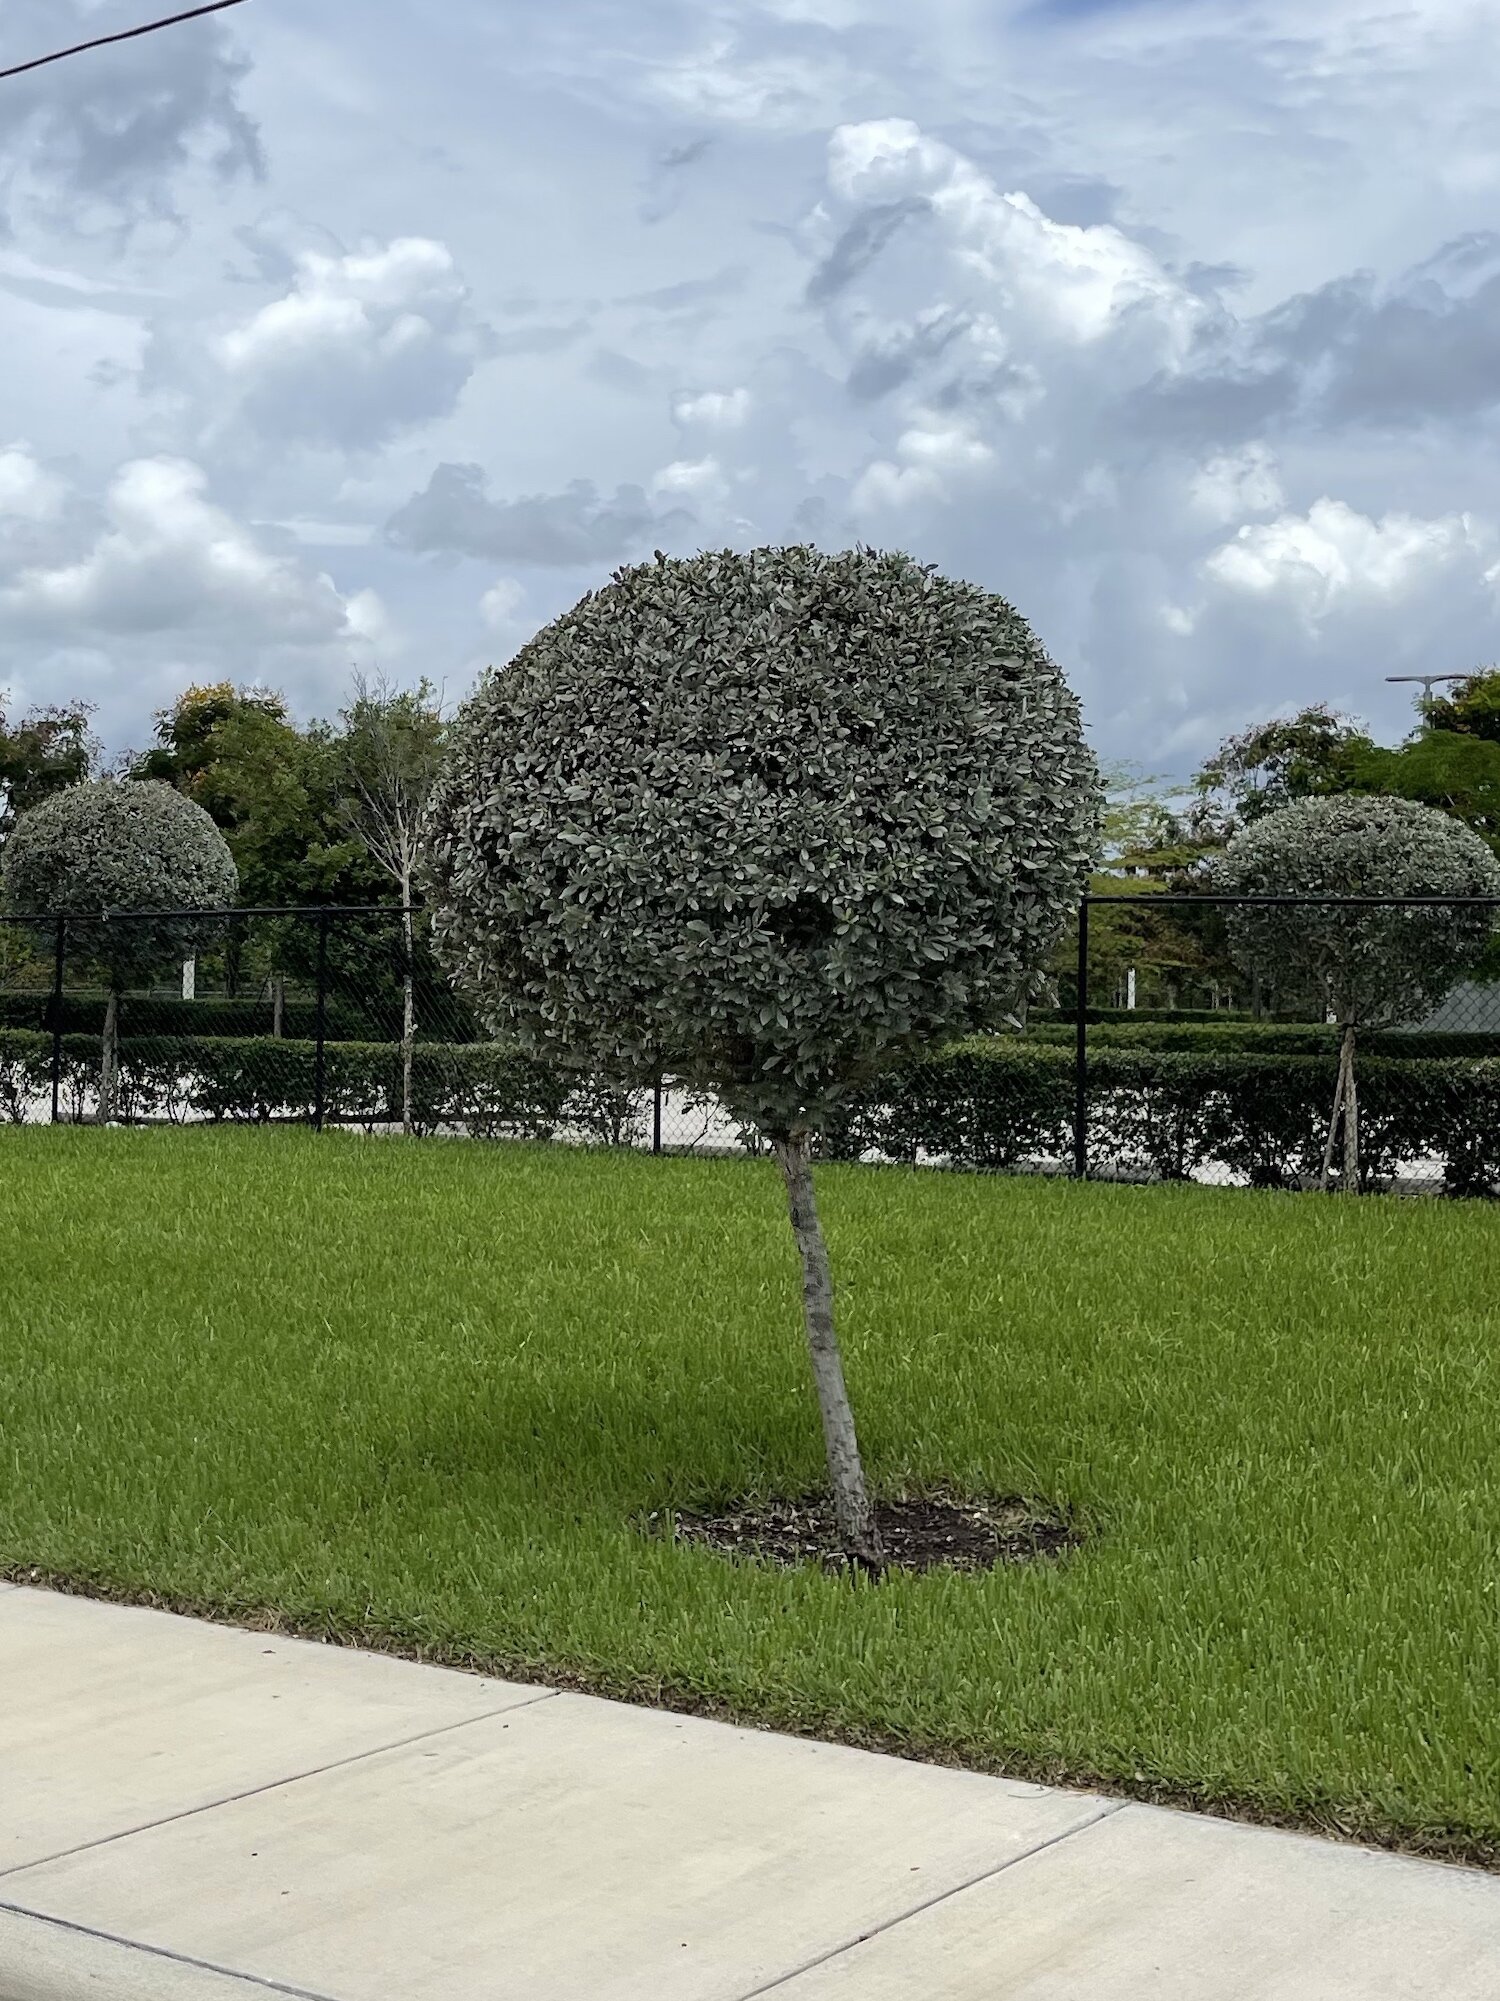 Spherical silver buttonwood trees